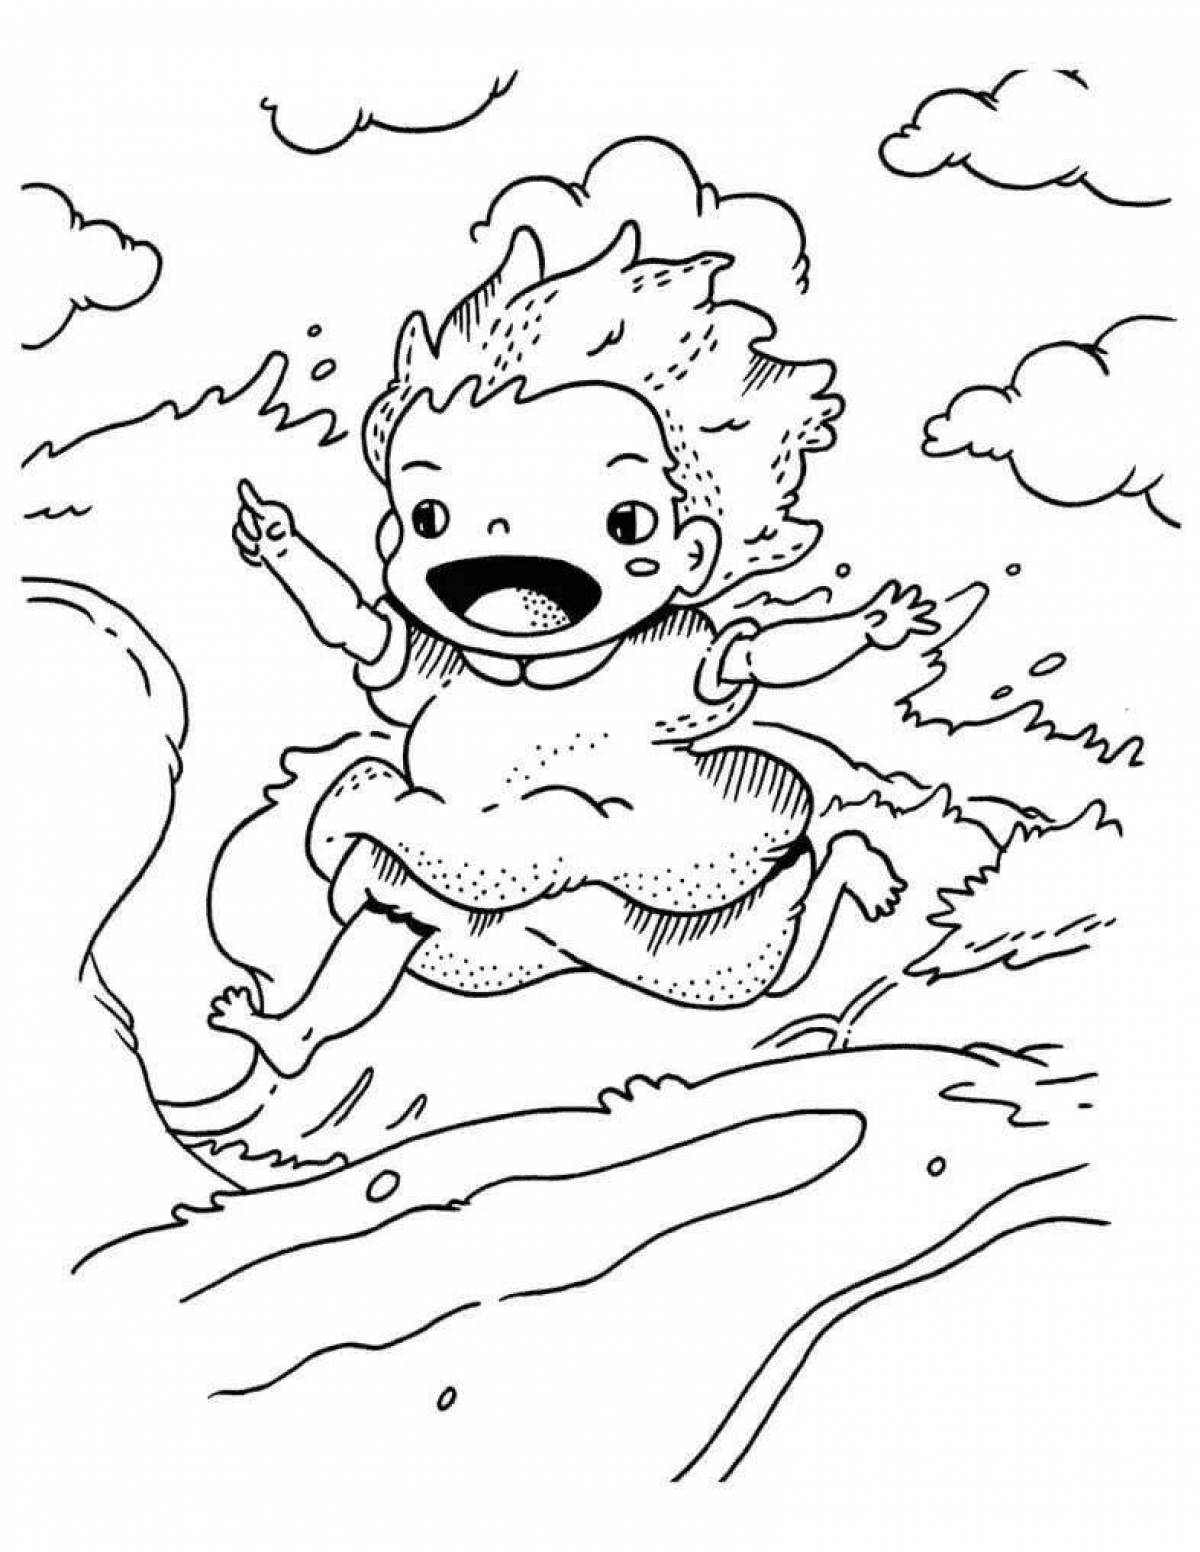 Animated ponyfish coloring page